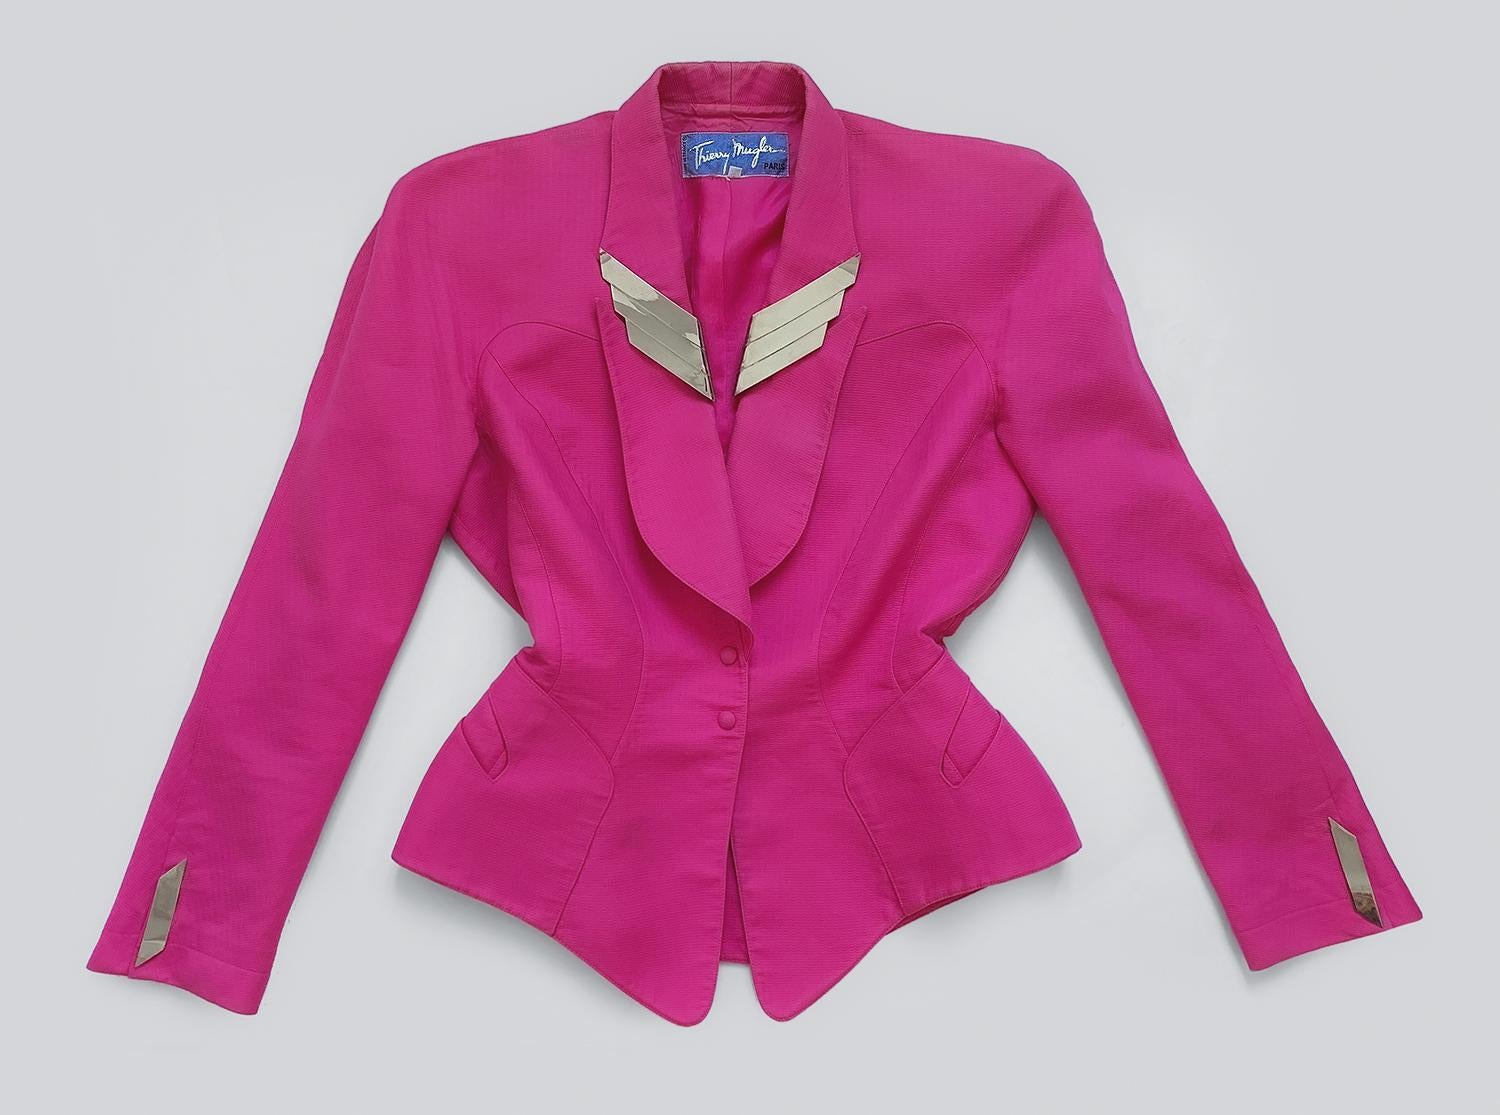 Iconic Rare Thierry Mugler Pink Ensemble Metal Wings For Sale 1